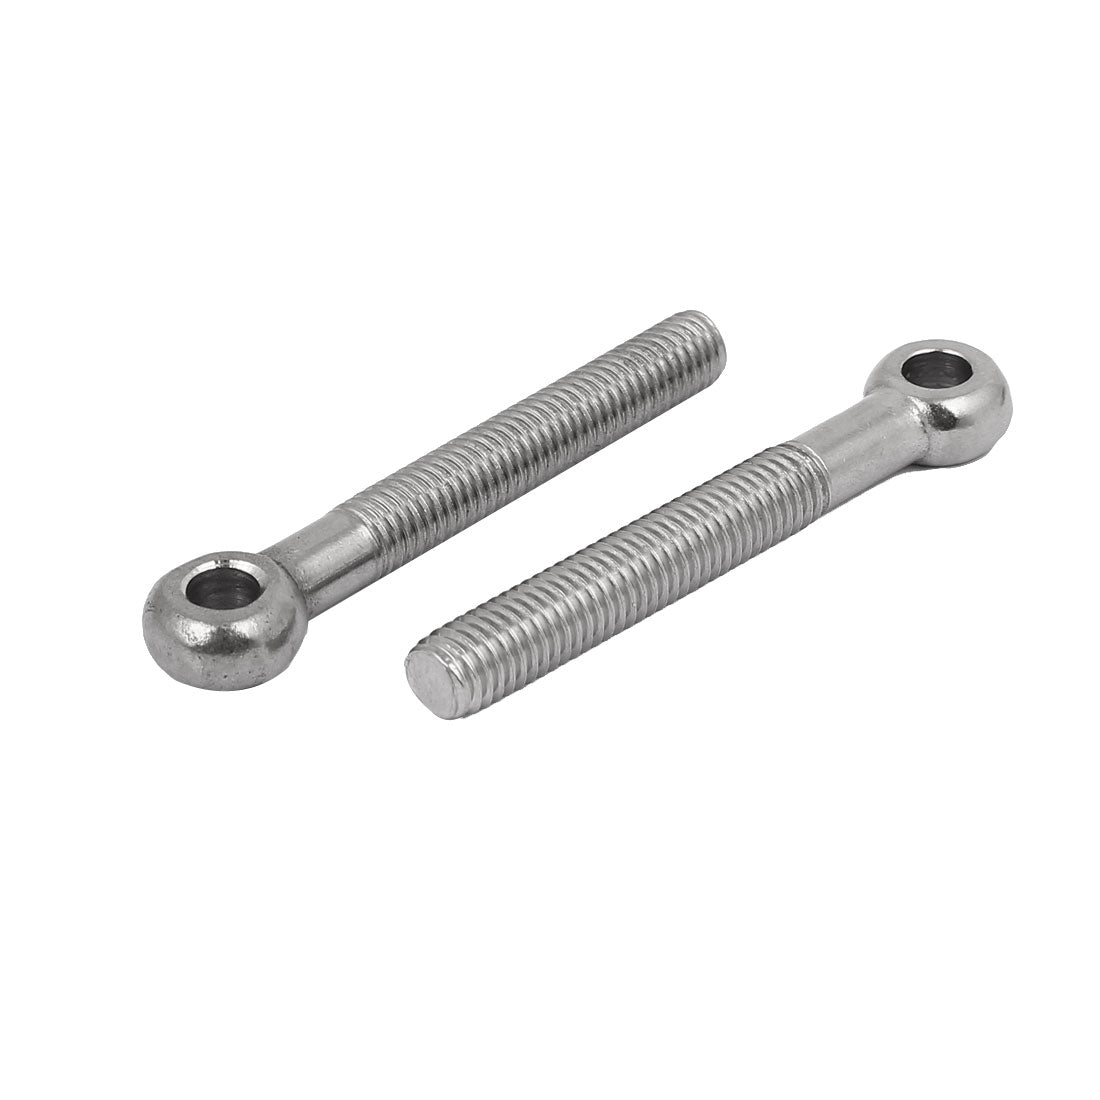 uxcell Uxcell M8x60mm 304 Stainless Steel Machine Shoulder Lifting Eye Bolt Fastener 12pcs